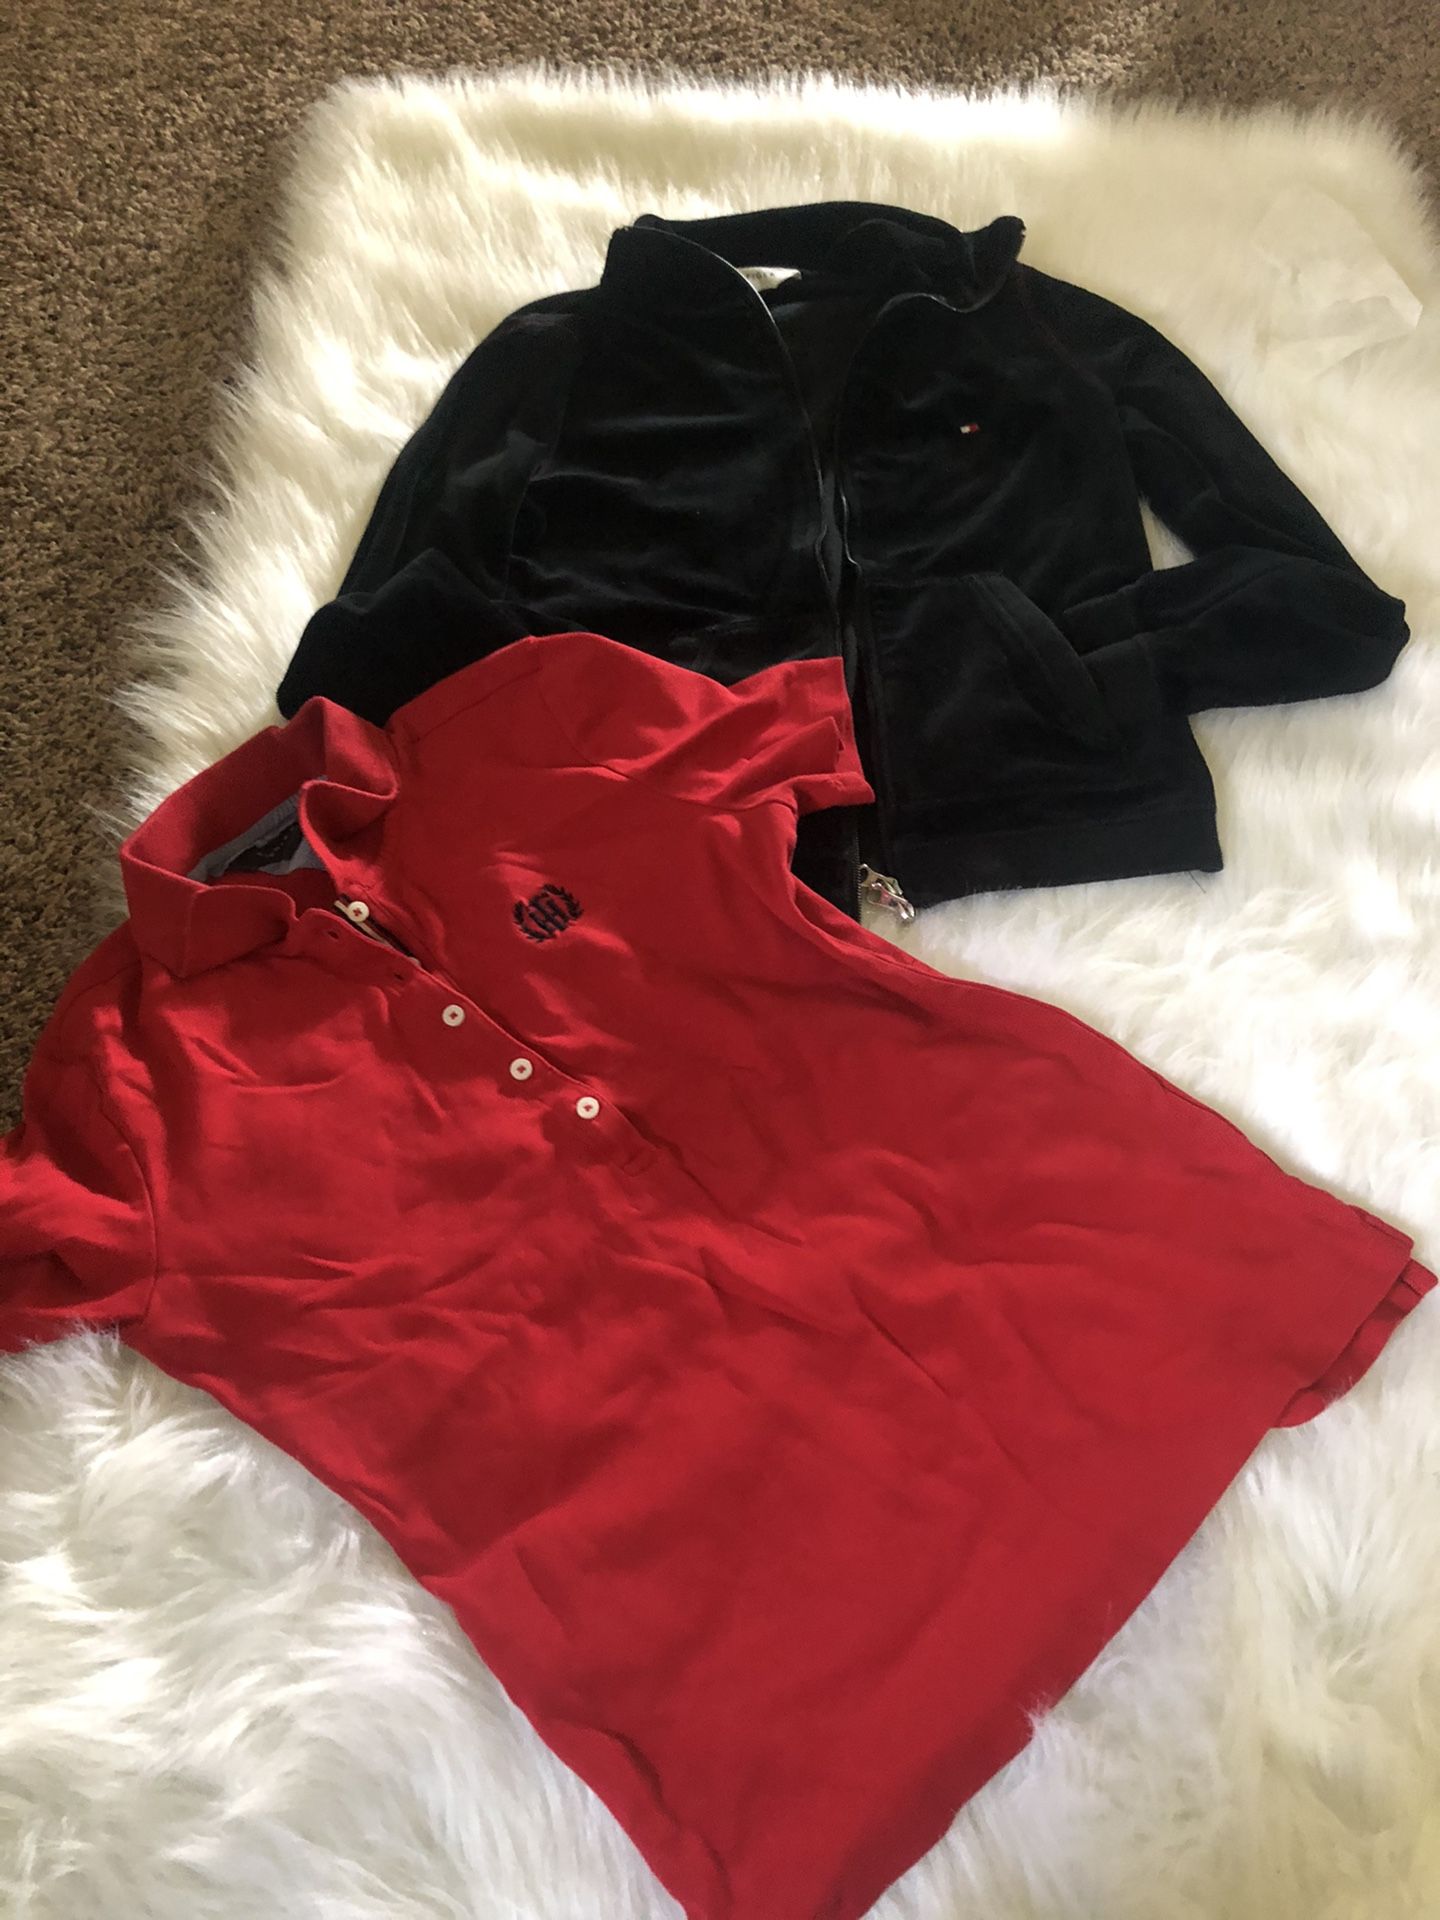 Tommy Hilfiger sweater and shirt size s